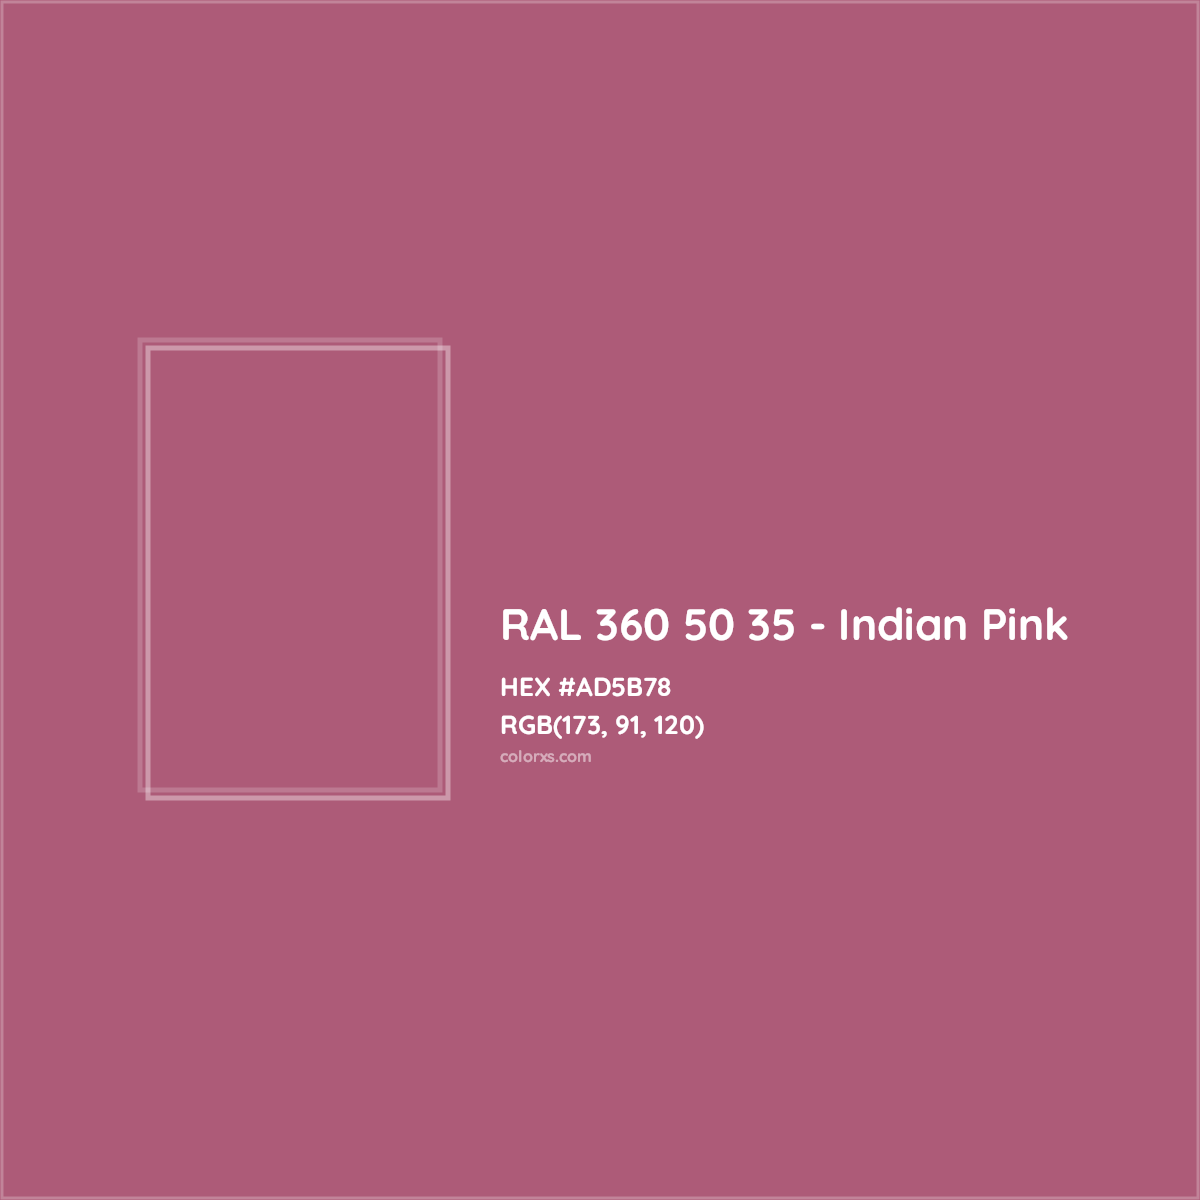 HEX #AD5B78 RAL 360 50 35 - Indian Pink CMS RAL Design - Color Code